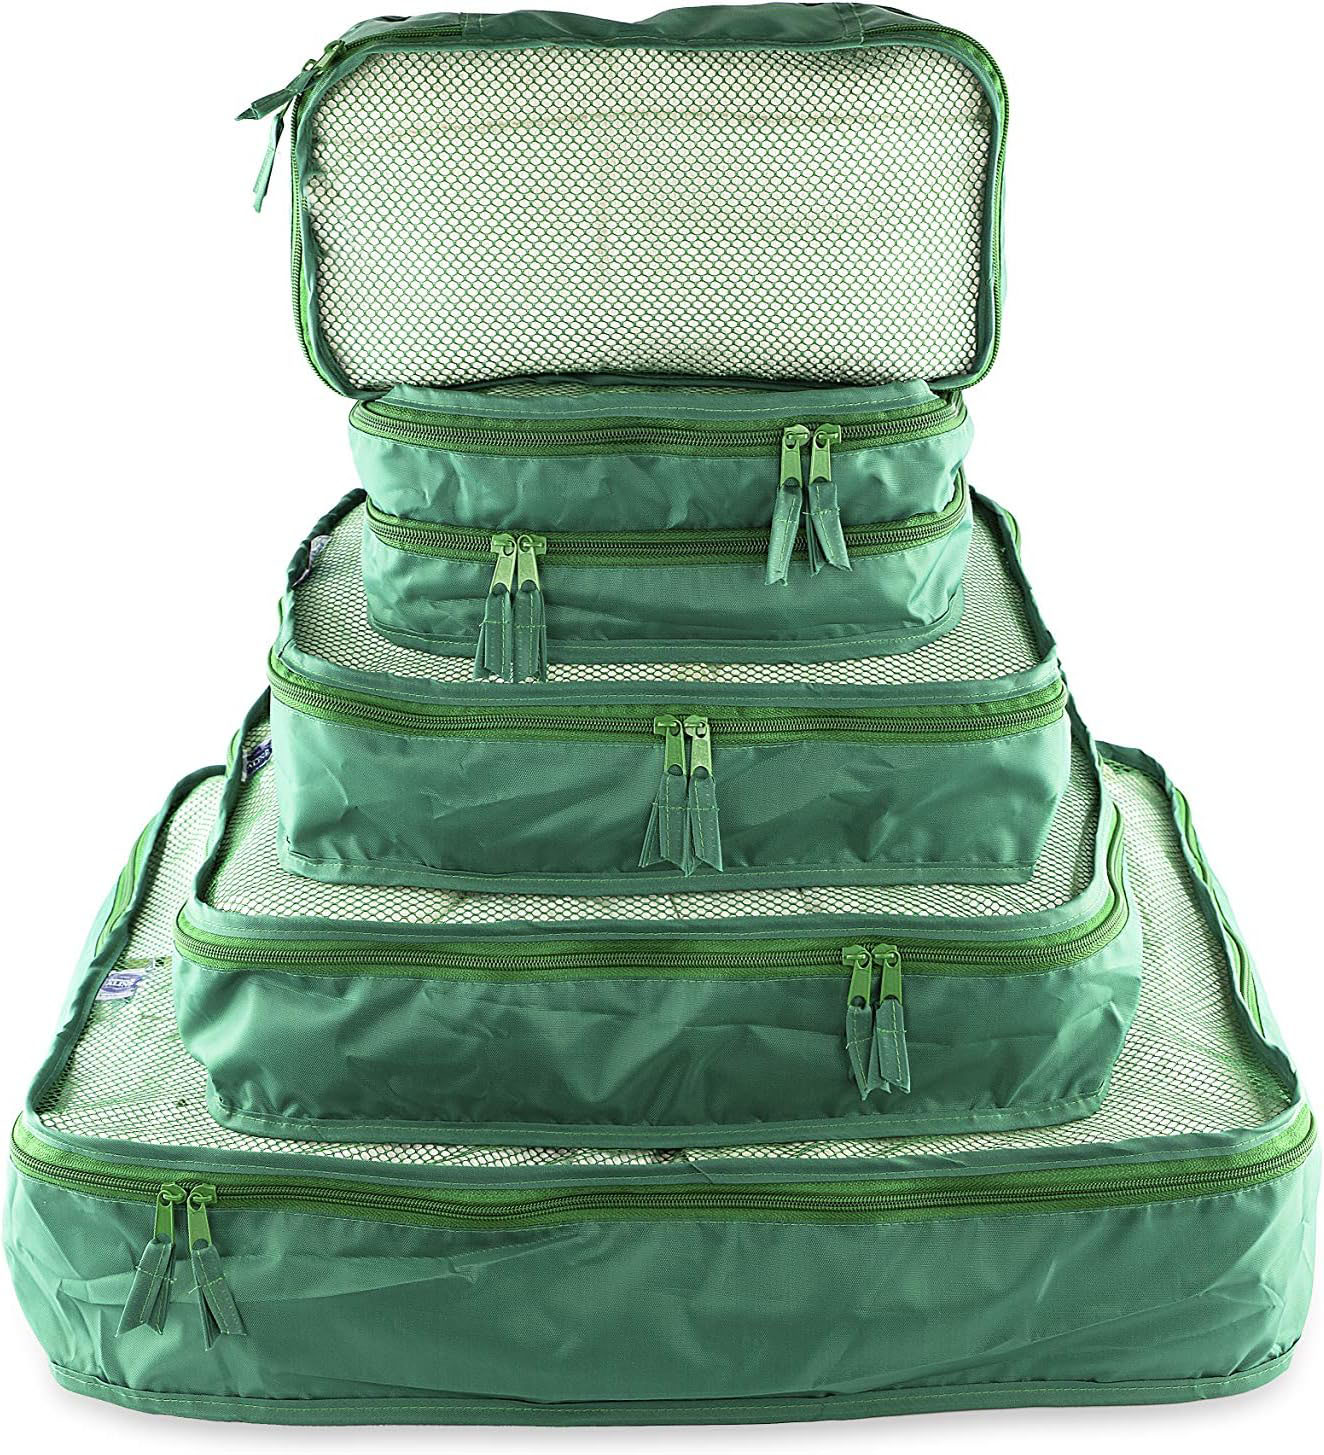 5 Packing Cubes for Travel Luggage